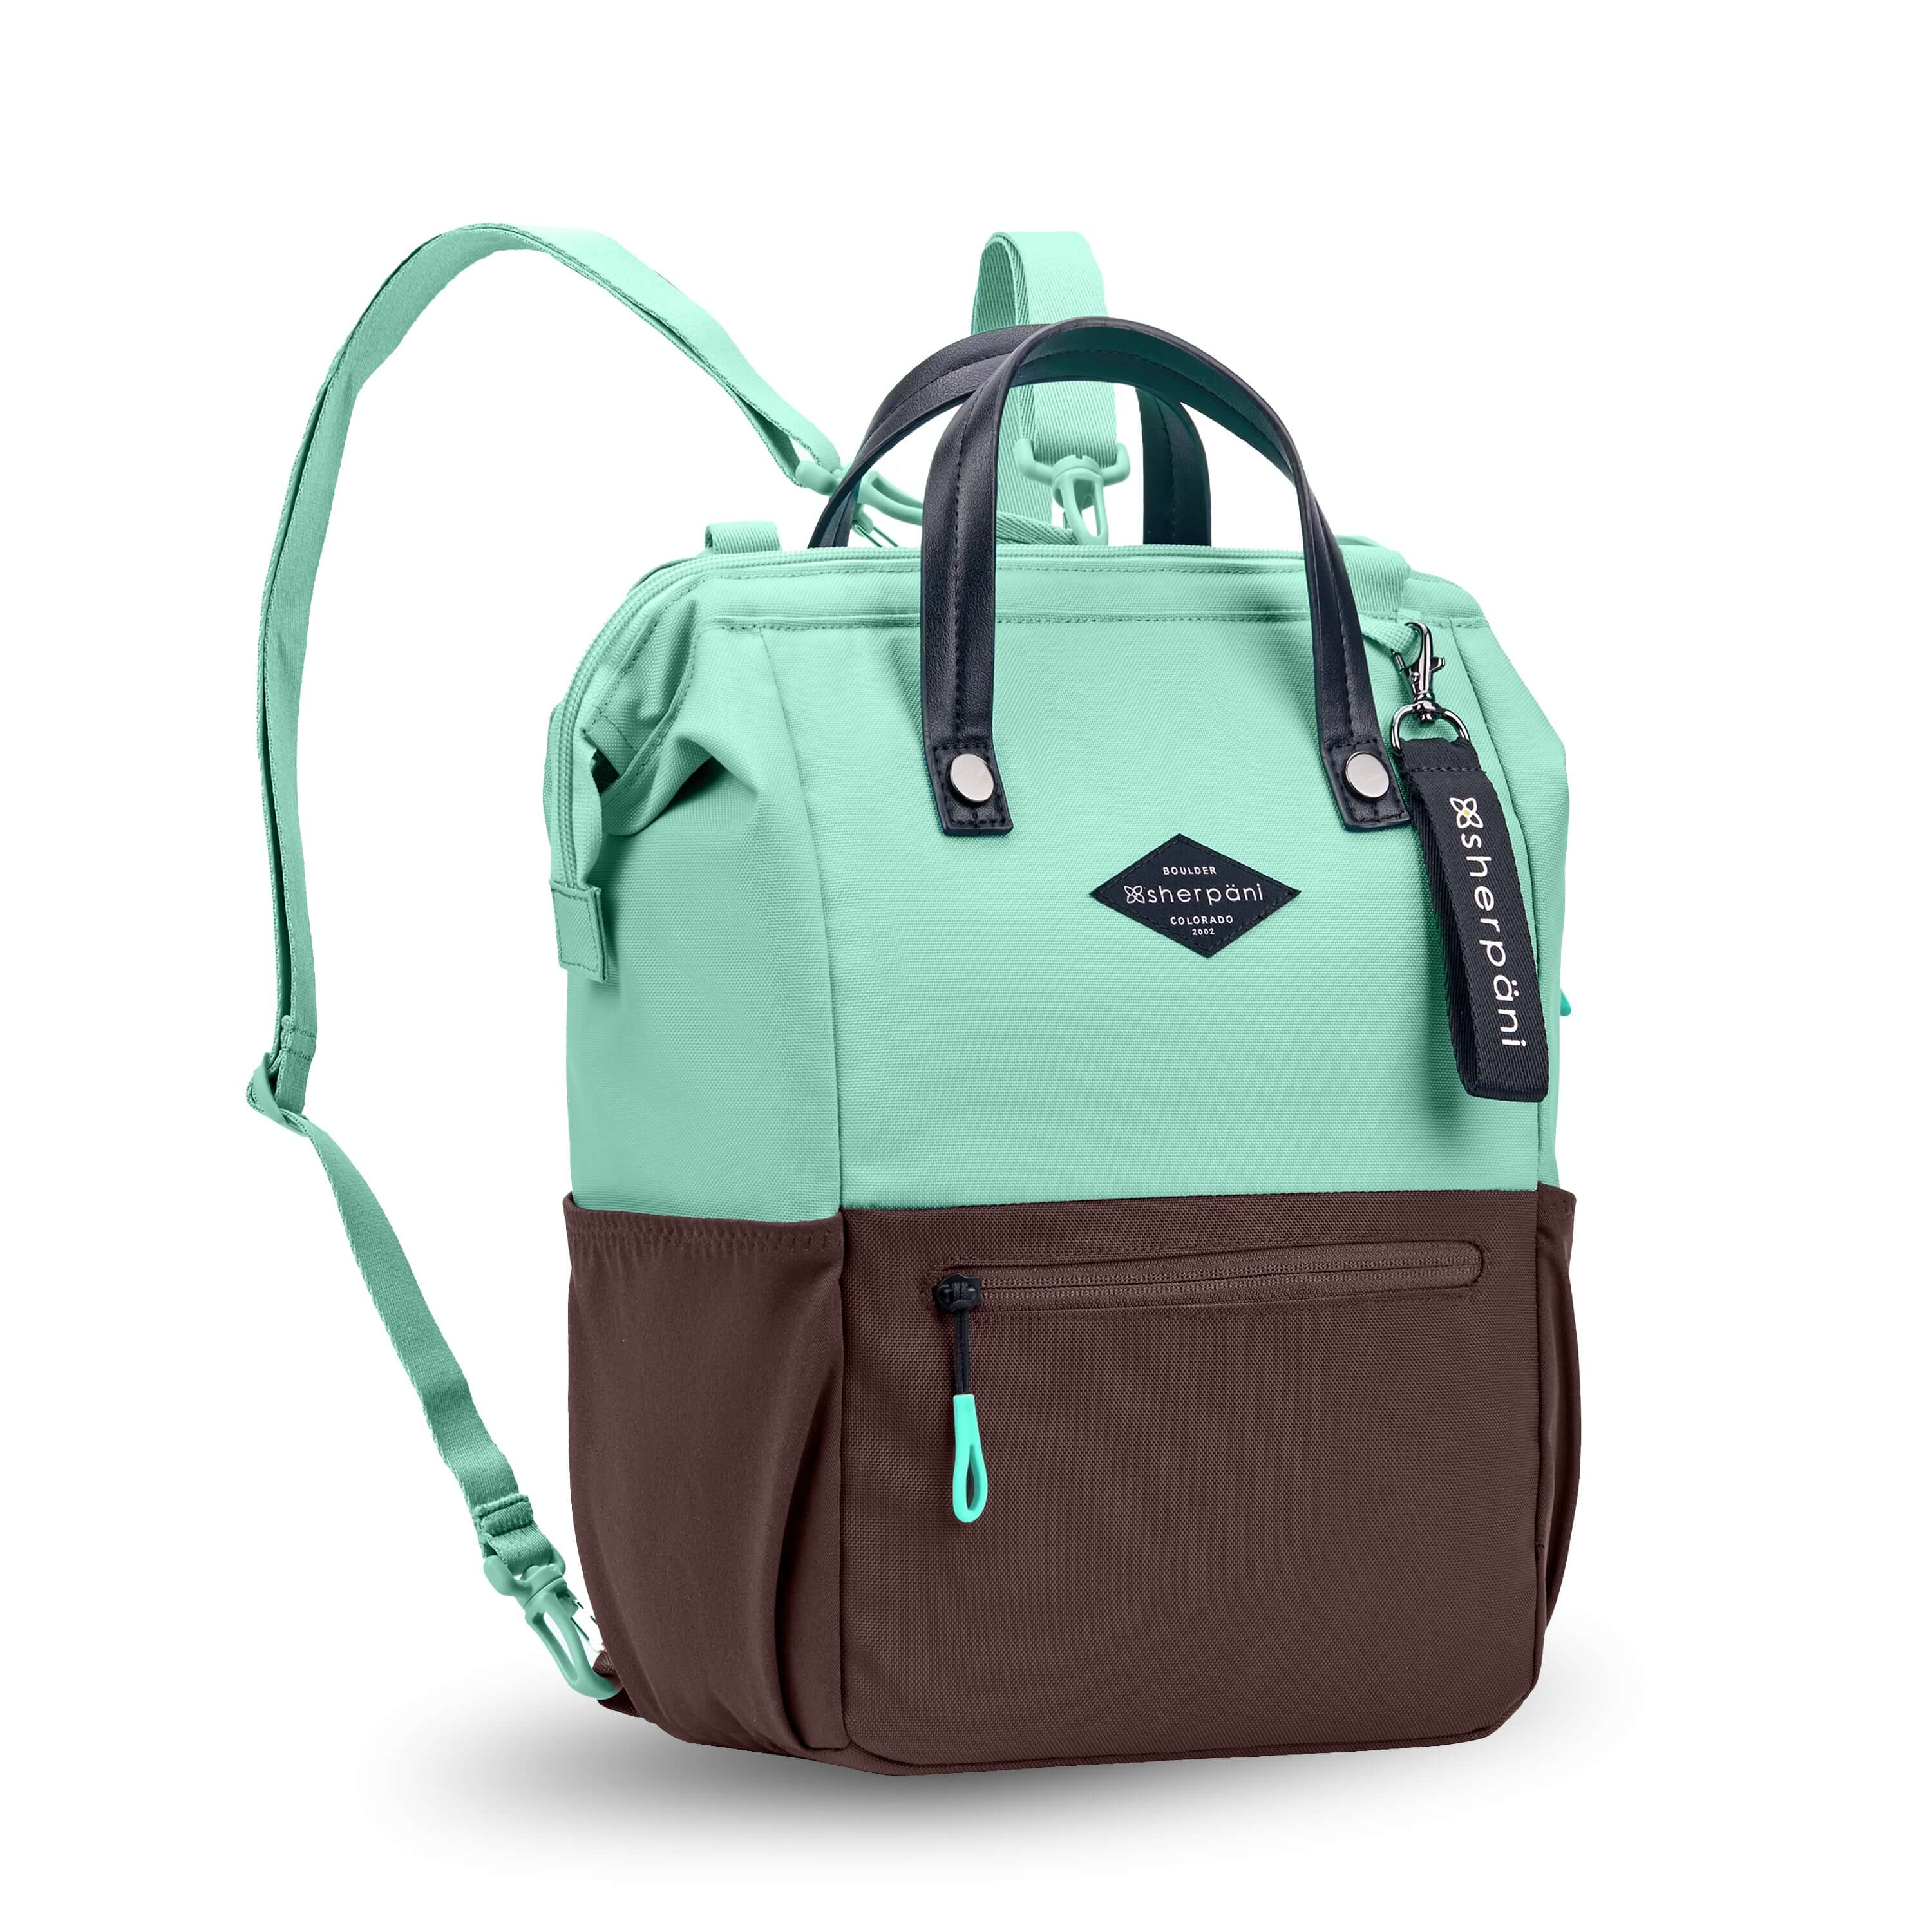 Angled front view of Sherpani three-in-one bag, the Dispatch in Seagreen. The bag is two-toned: the top is light green and the bottom is brown. There is an external zipper pocket on the front panel. Easy-pull zippers are accented in light green. A branded Sherpani keychain is clipped to the upper right corner. Elastic water bottle holders sit on either side of the bag. It has short tote handles and adjustable/detachable straps that can function for a backpack or crossbody. #color_seagreen